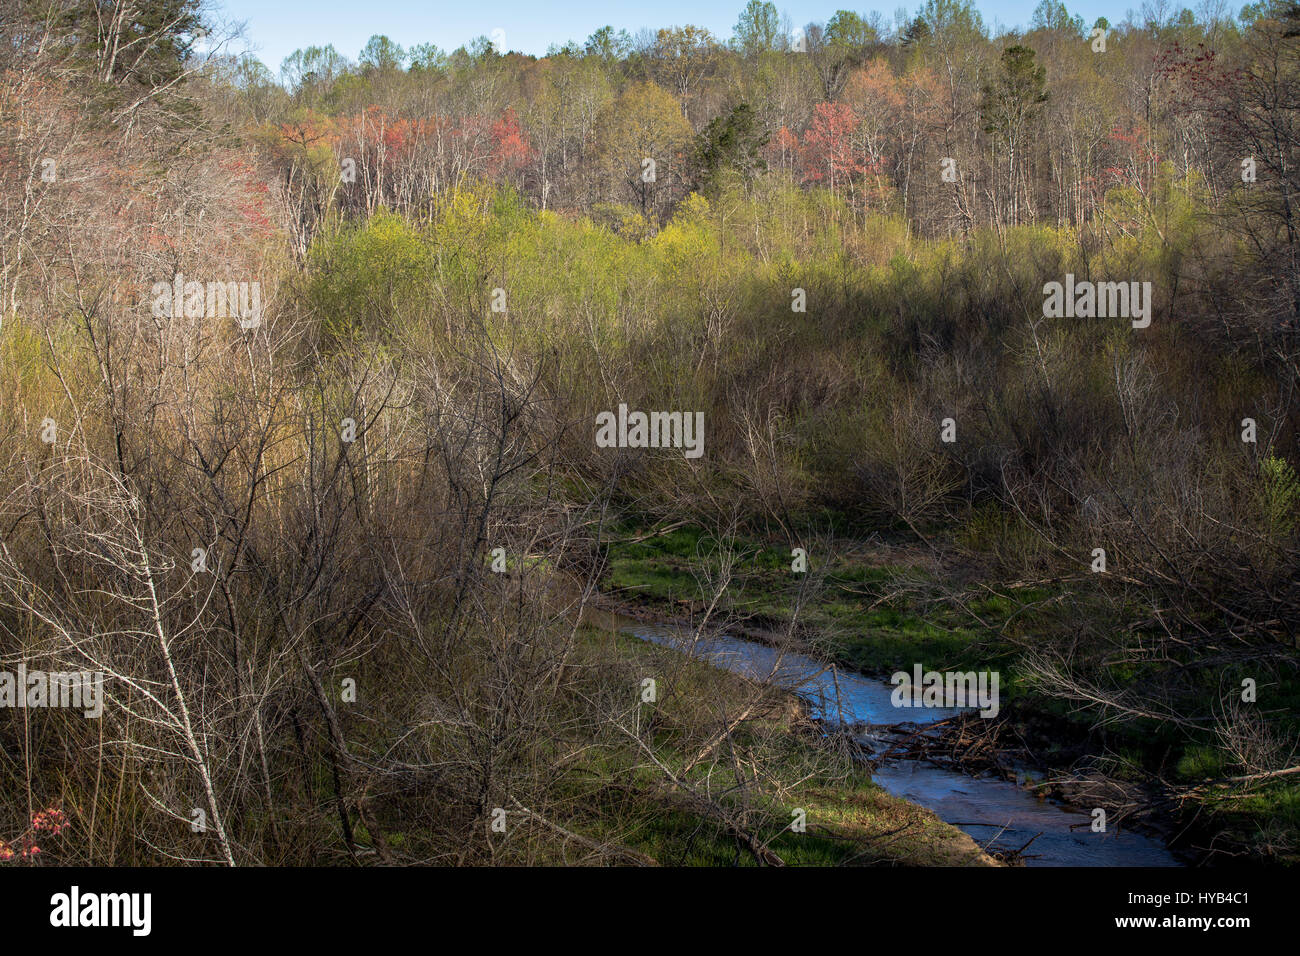 This is an image of the area in which Latham Creek empties into Lake Lanier along the Chestatee River section of the lake.  Typically this view would show a cove of the lake, but the water levels are still so low the area is relatively dry and beginning to grow vegetation again. Stock Photo